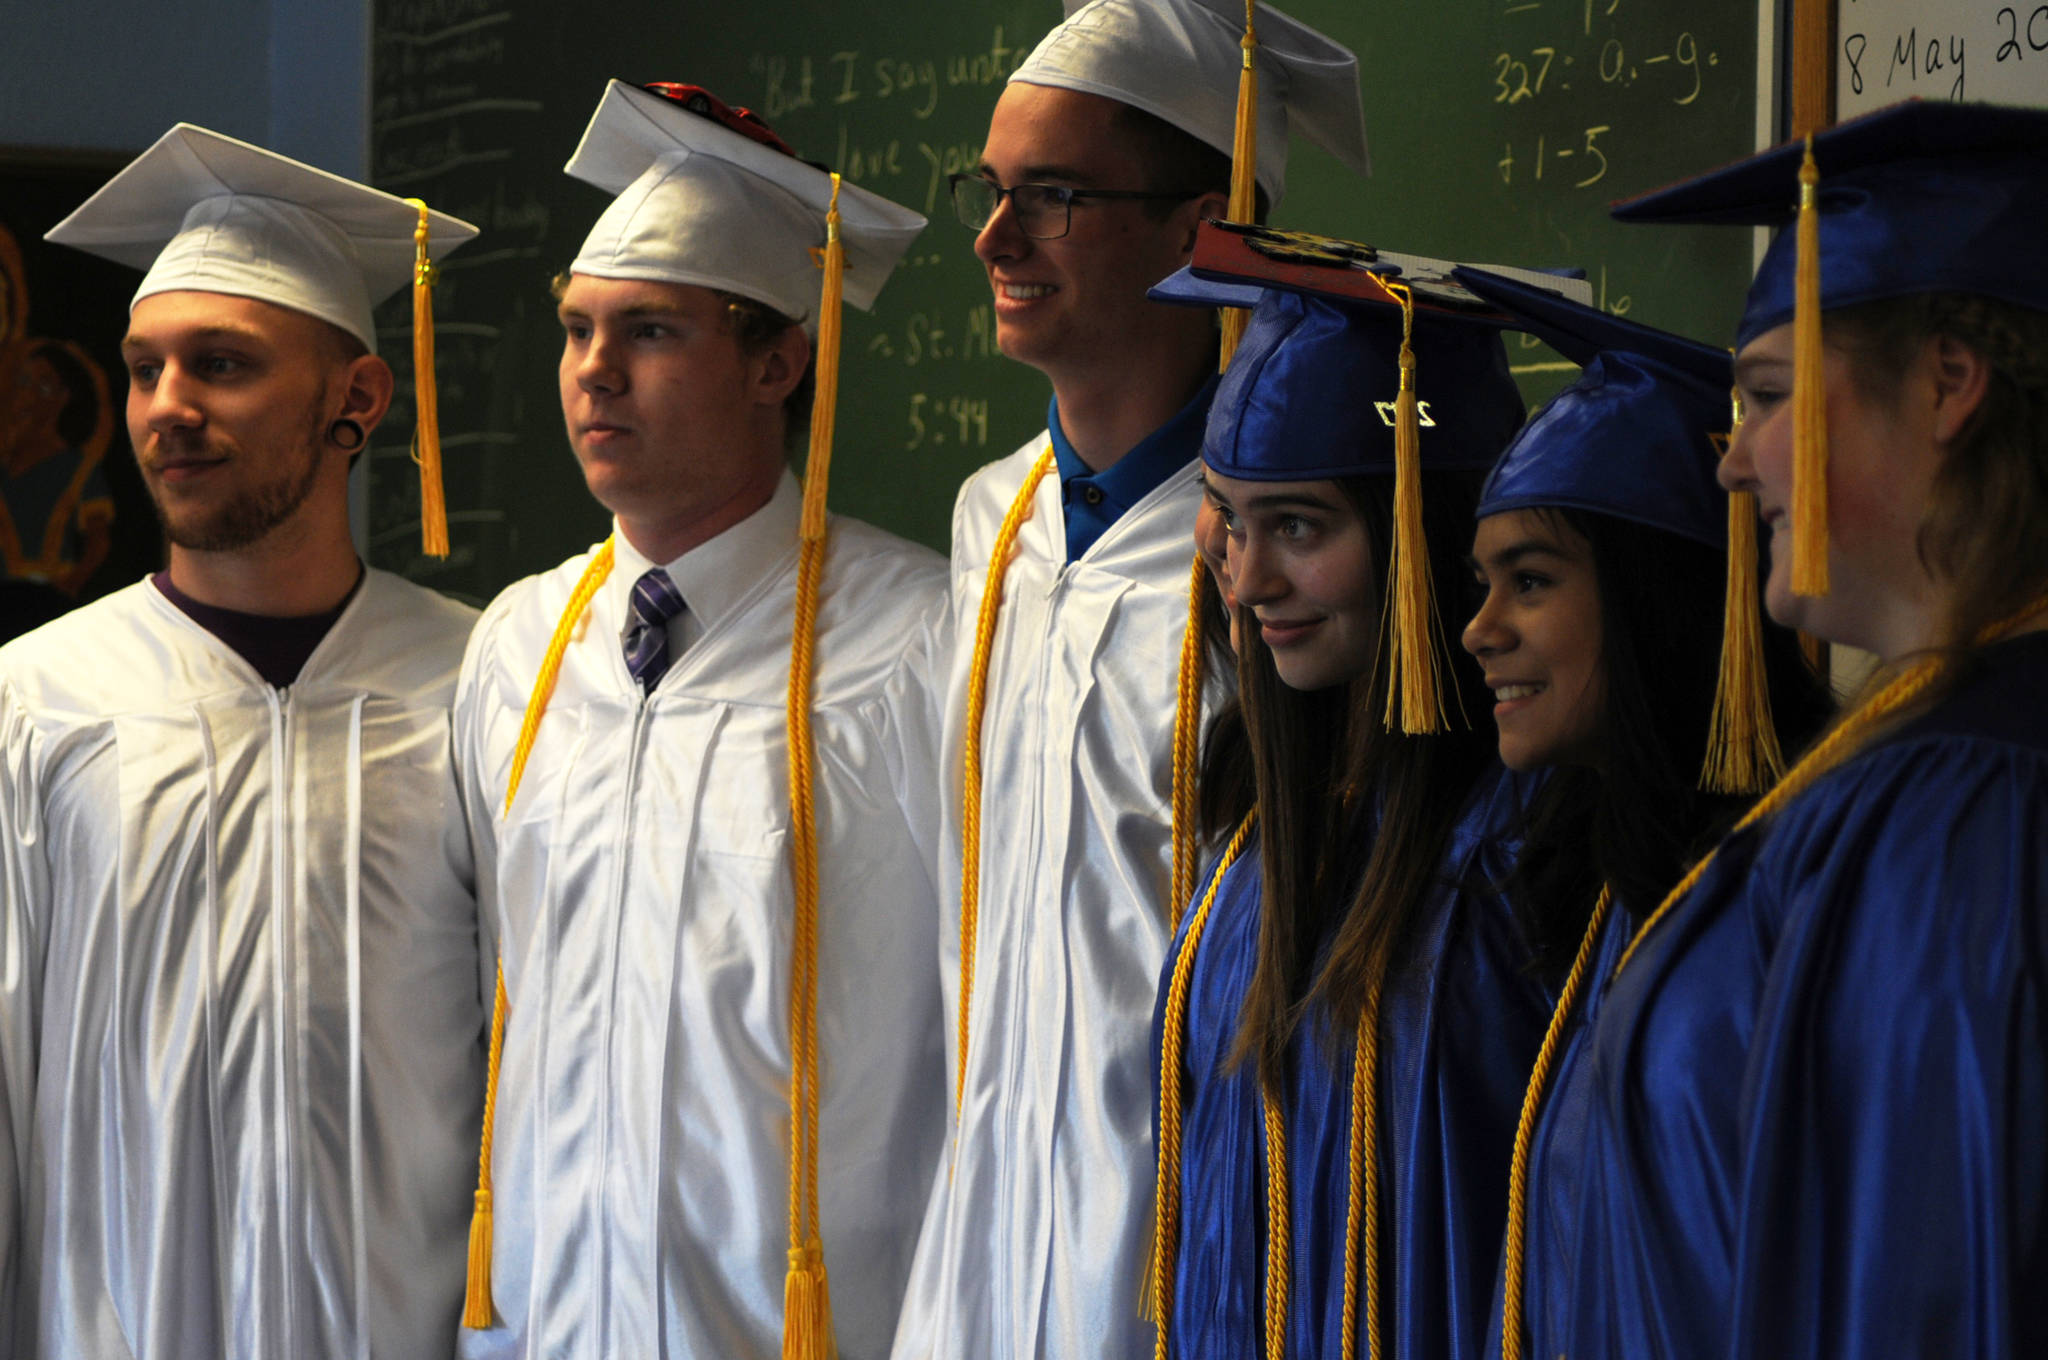 Cook Inlet Academy’s graduating class of 2017, with seven seniors, lines up for a final photo before heading into the graduation ceremony held at the school Sunday, May 7, 2017 in Soldotna, Alaska. (Elizabeth Earl/Peninsula Clarion)  Cook Inlet Academy’s graduating class of 2017, with seven seniors, lines up for a final photo before heading into the graduation ceremony held at the school Sunday in Soldotna. (Elizabeth Earl/Peninsula Clarion)